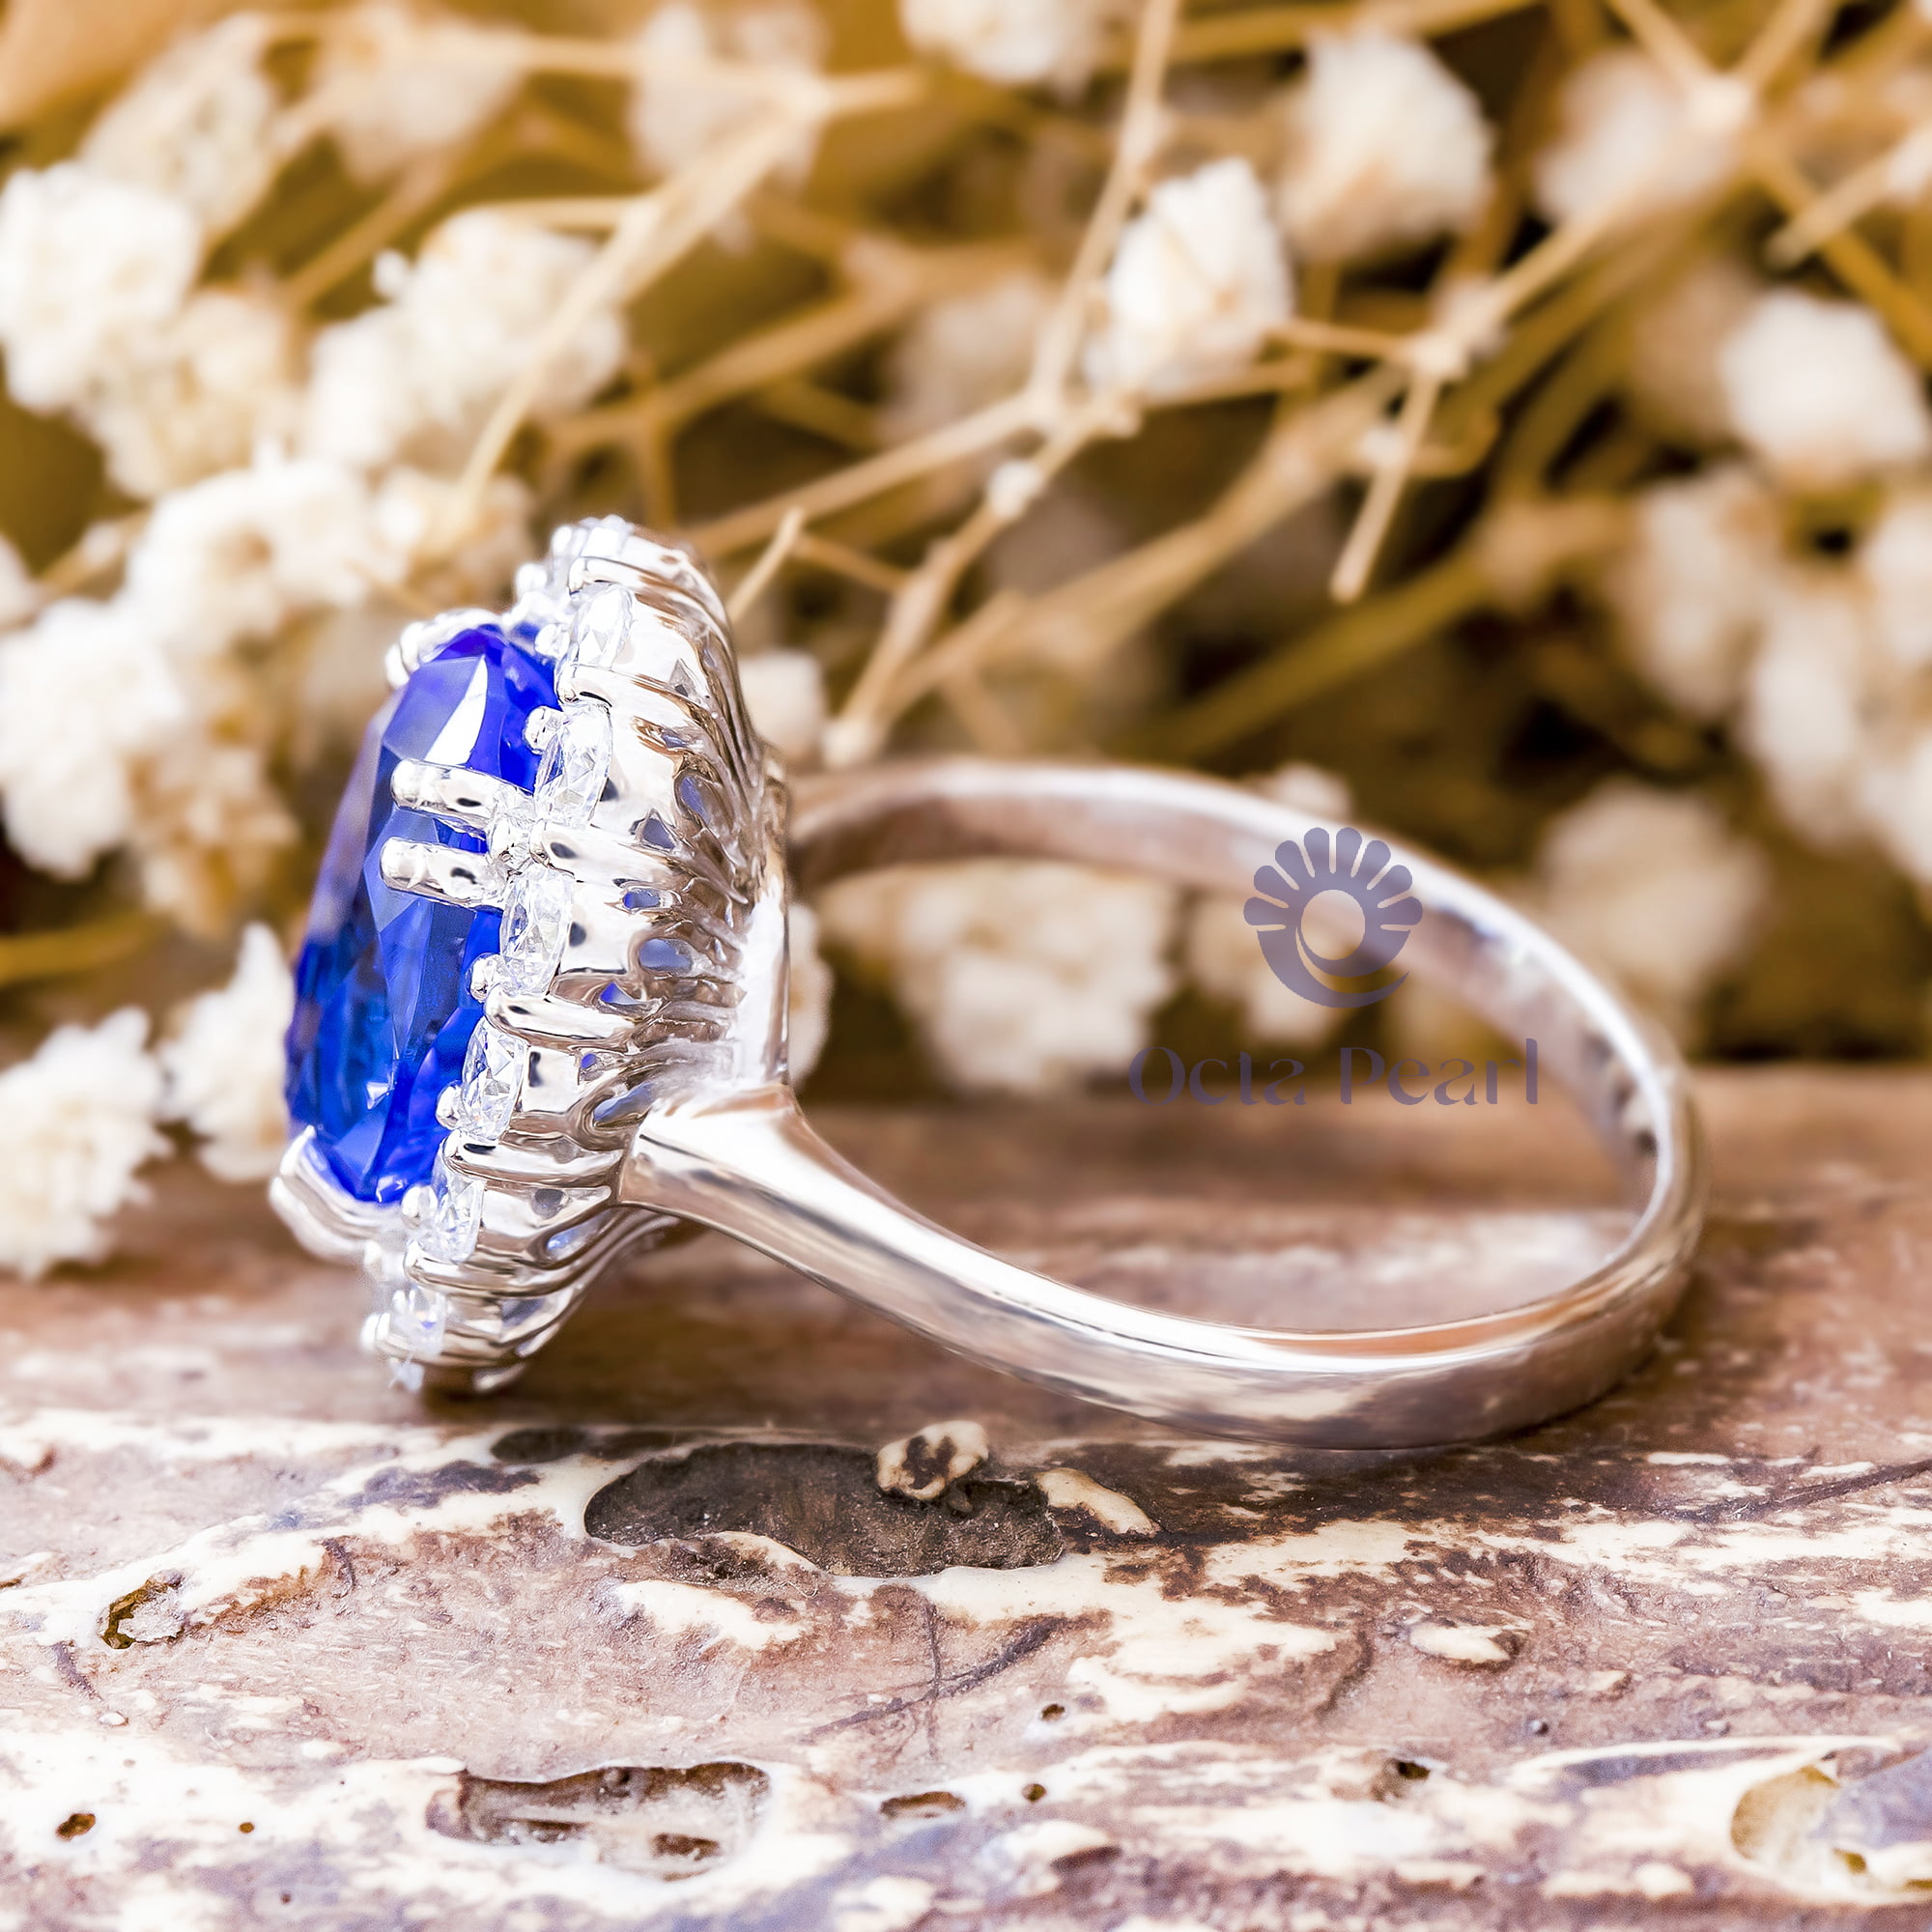 Royal Blue Sapphire Oval Cut With Round White CZ Stone Floral Motif Halo Engagement Ring ( 9 7/8 TCW )